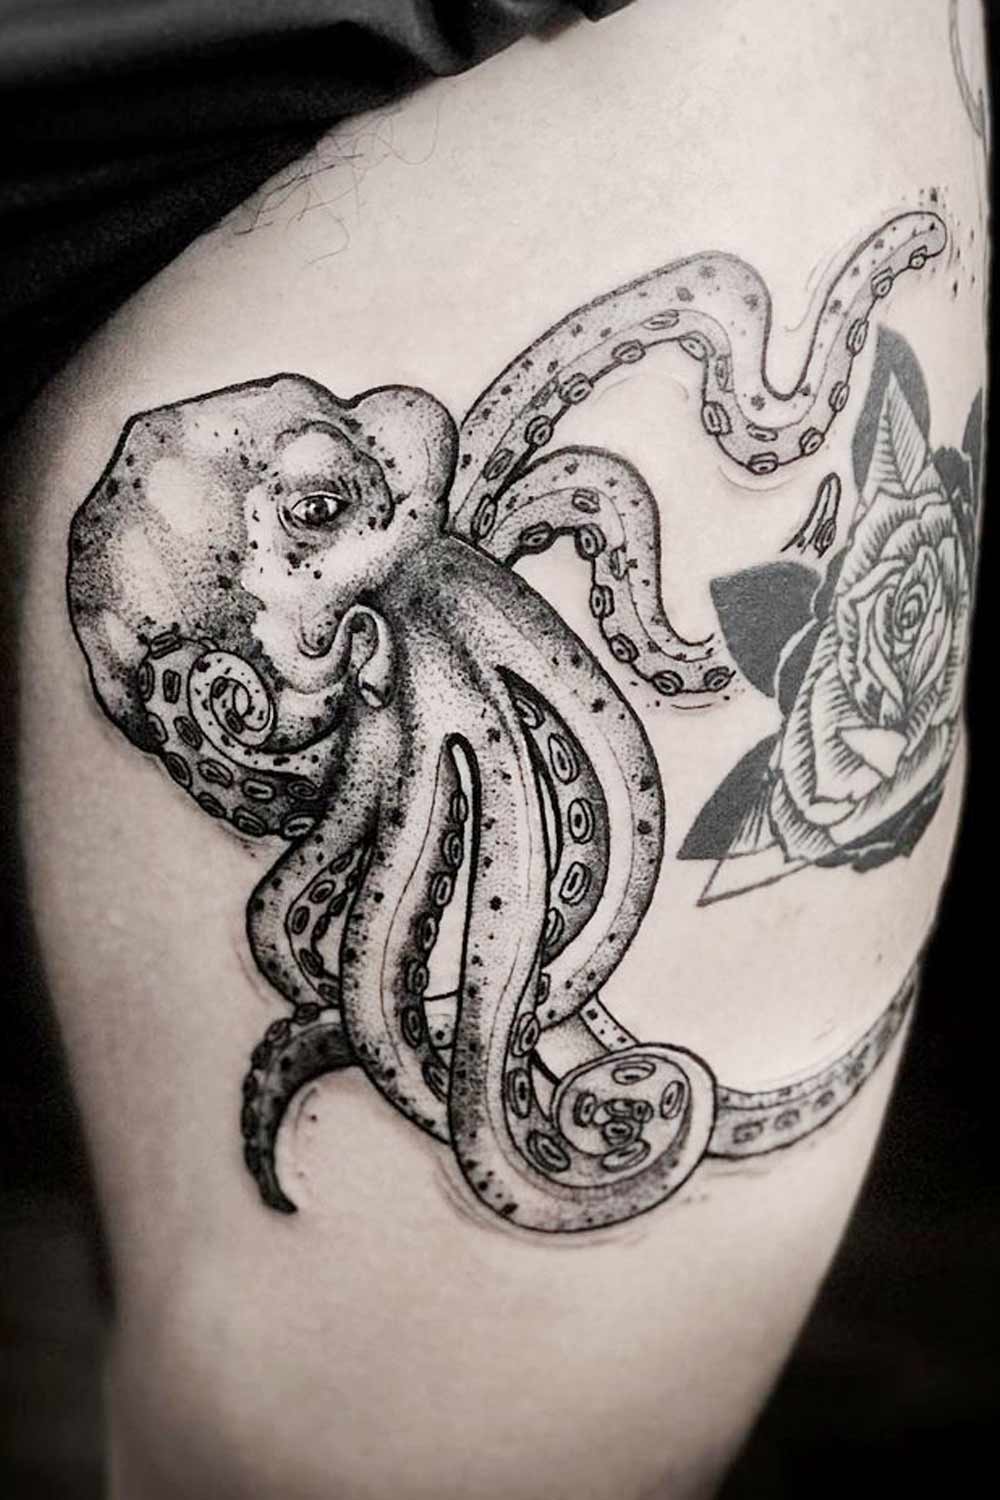 Octopus with Rose Thigh Tattoo Idea